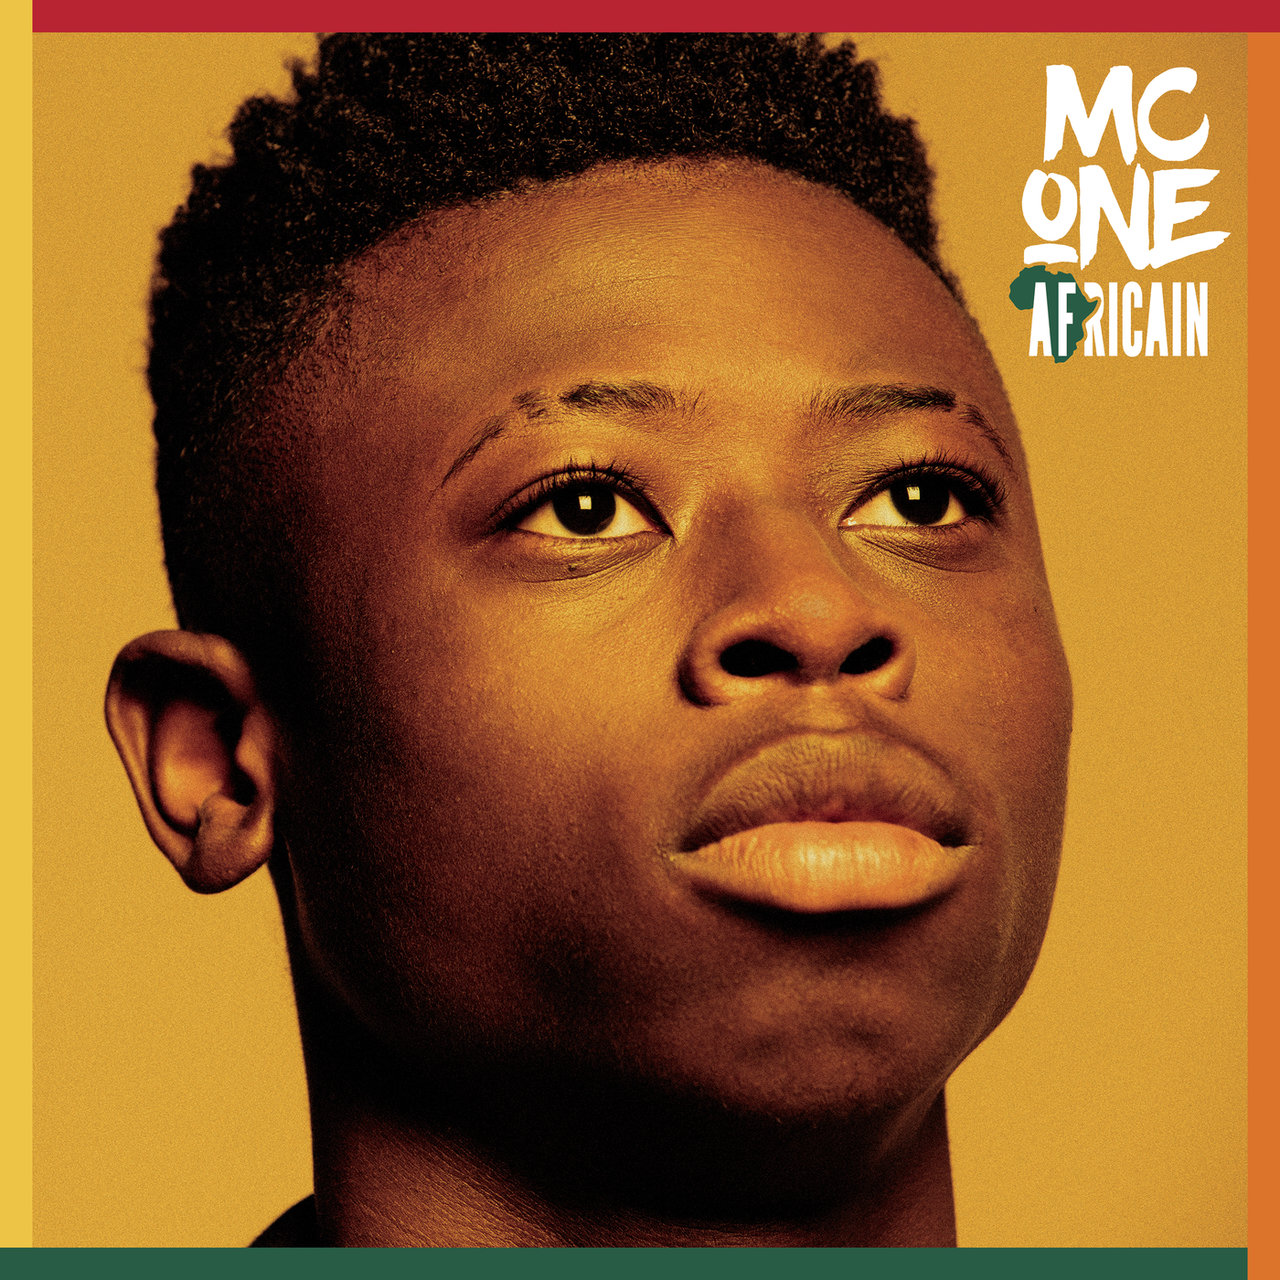 MC One - Africain (Cover)